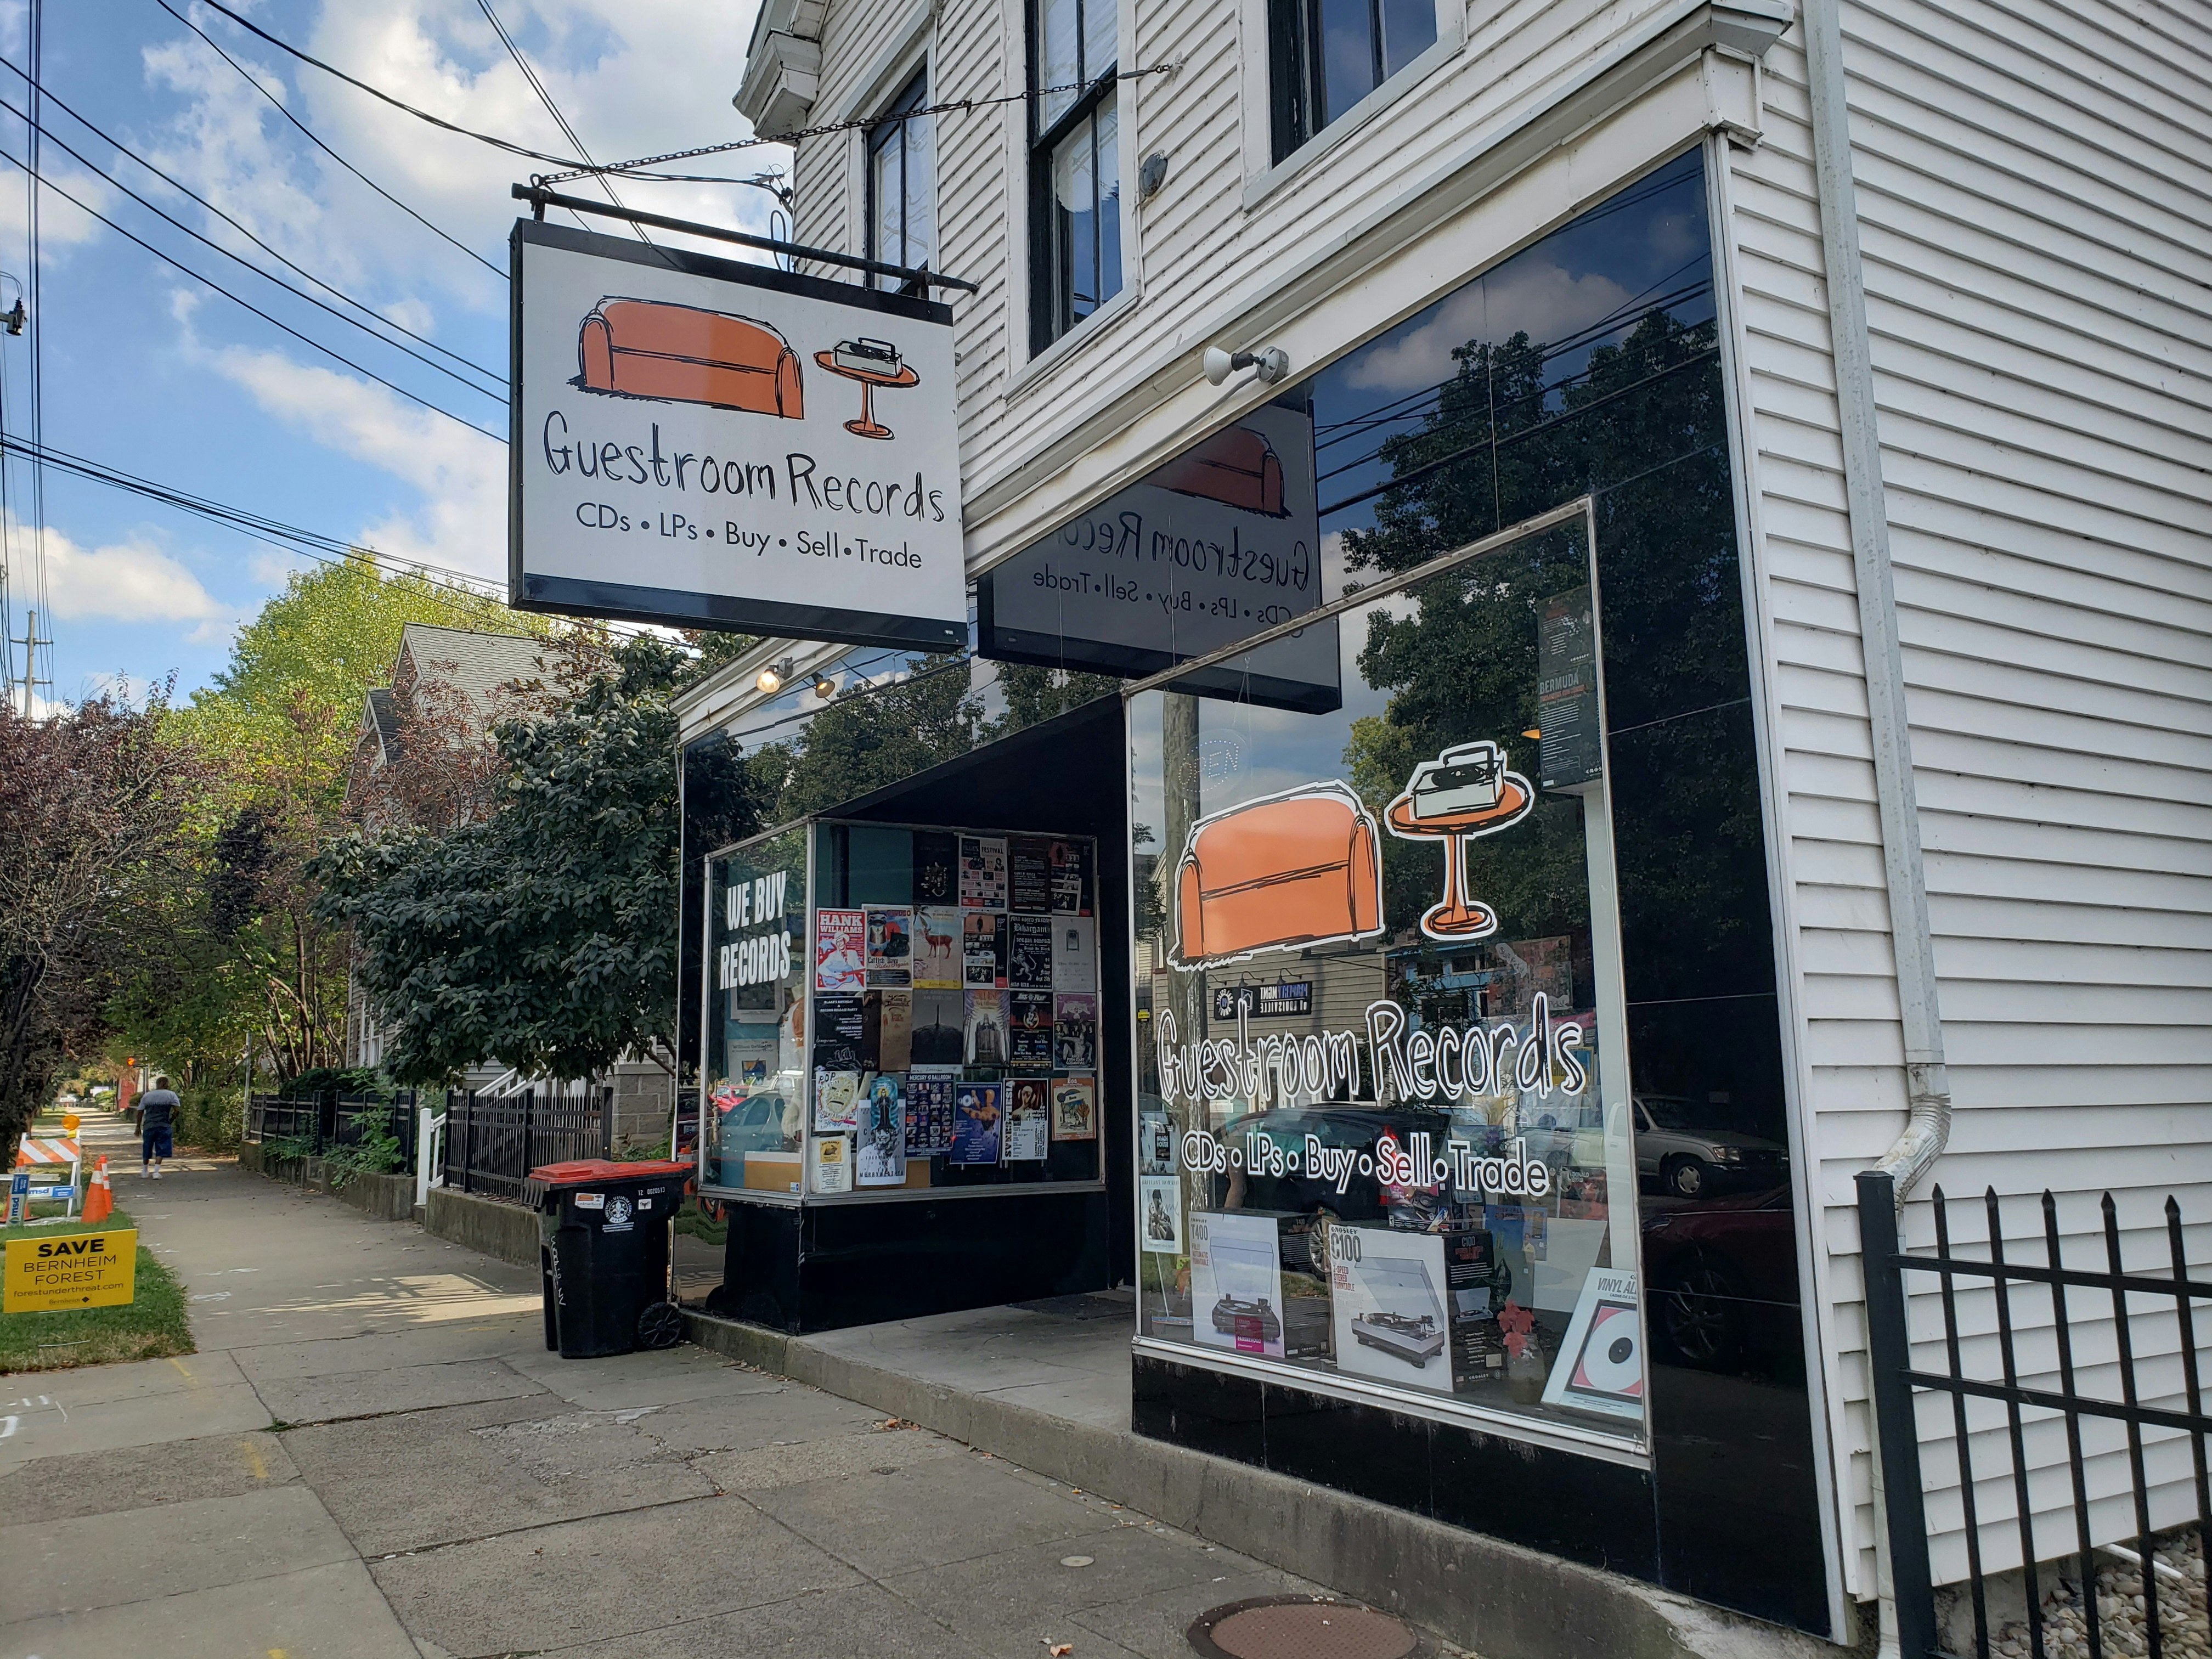 The exterior of Guestroom Records in Louisville, Kentucky is a two-story building with white clapboard siding. The storefront consists of two plate-glass windows on either side of a doorway, filled with colorful event posters and a large cartoony logo of an orange couch, an orange side table, with a record player on top. The concrete sidewalk extends to the left, showing a pretty tree-lined street and a pedestrian. 